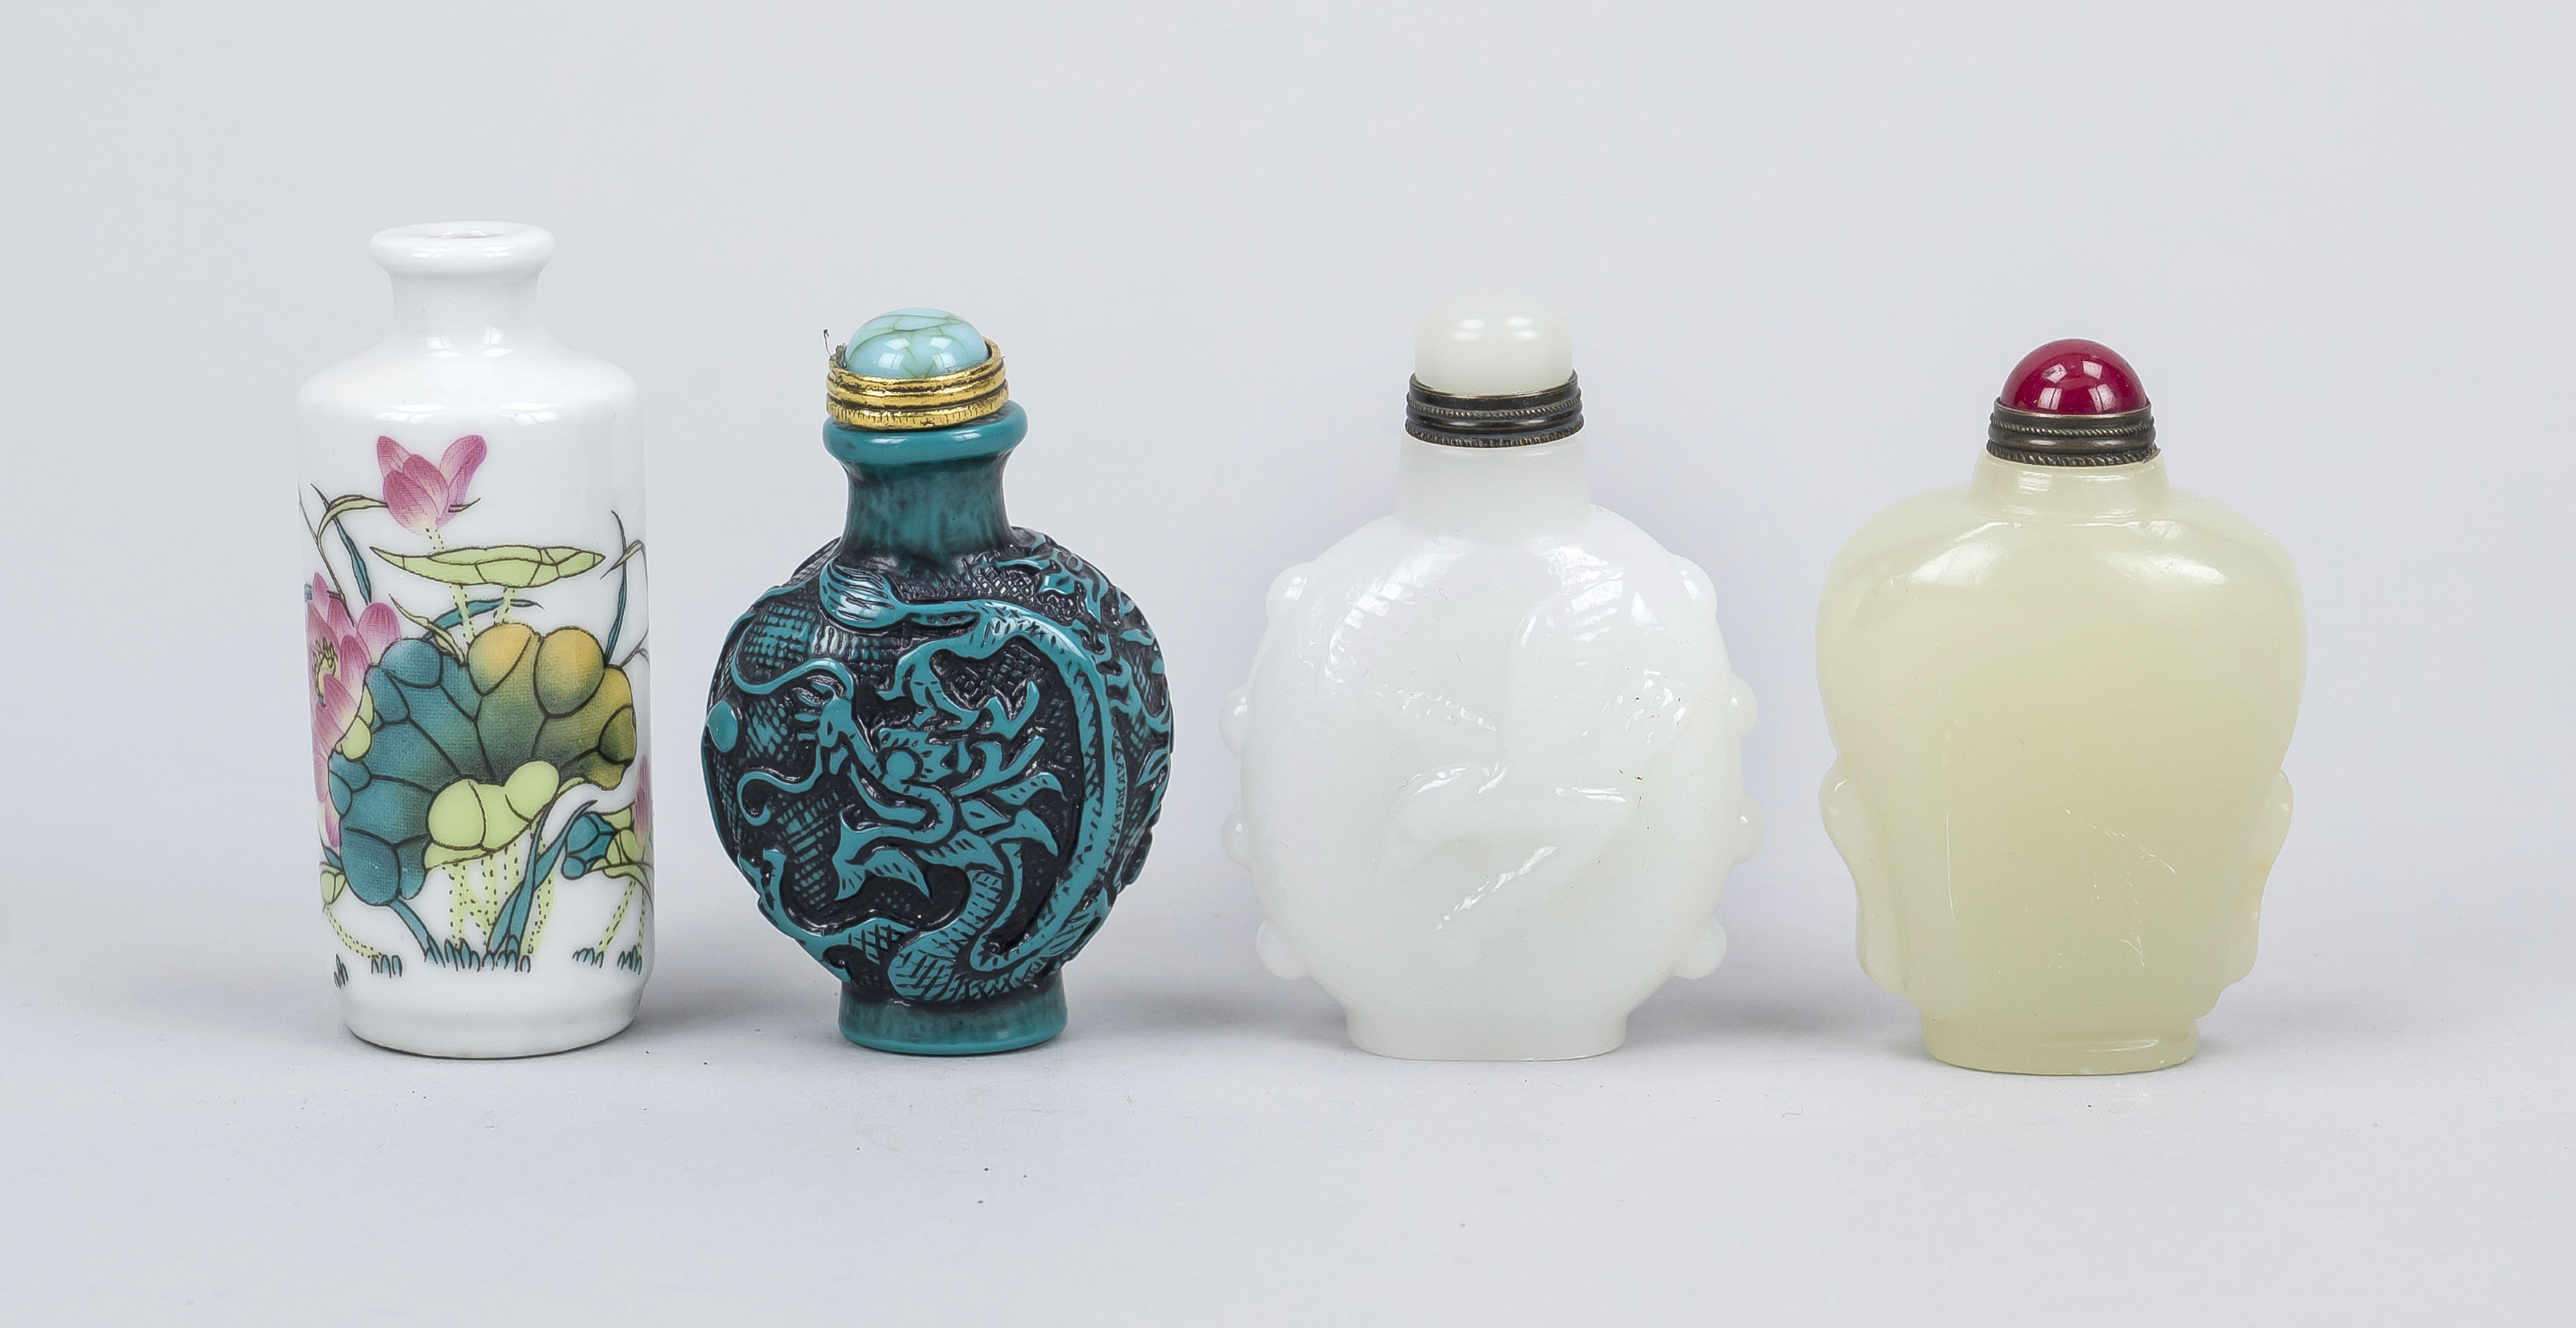 4 snuff bottles, China 20th century, various materials and shapes, 1 x without spoon, h. up to 7 cm